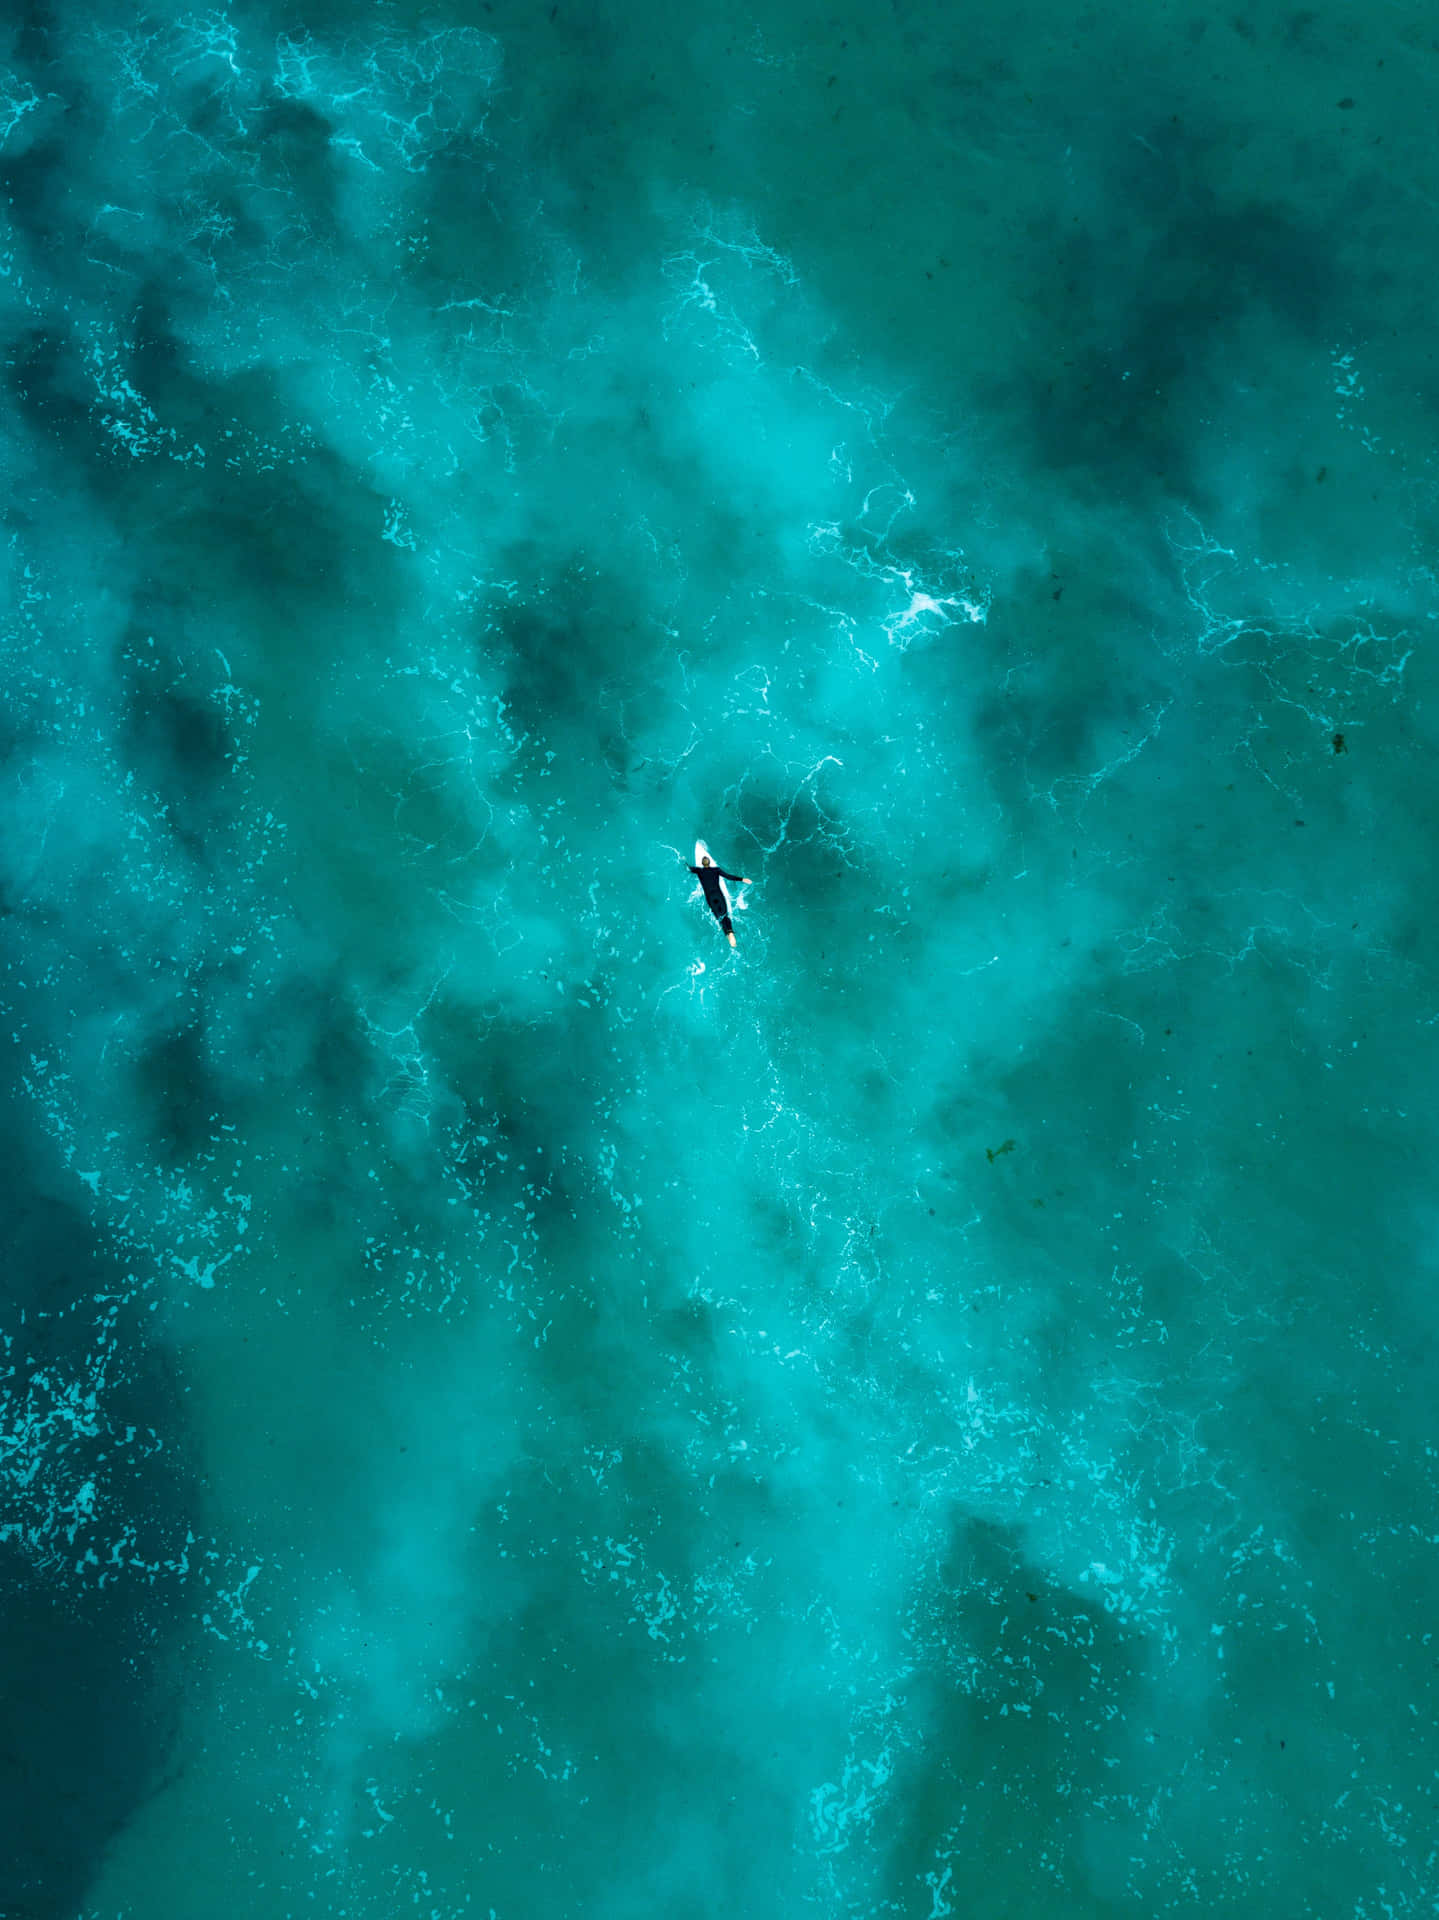 Take a dive into a world of teal aesthetic.